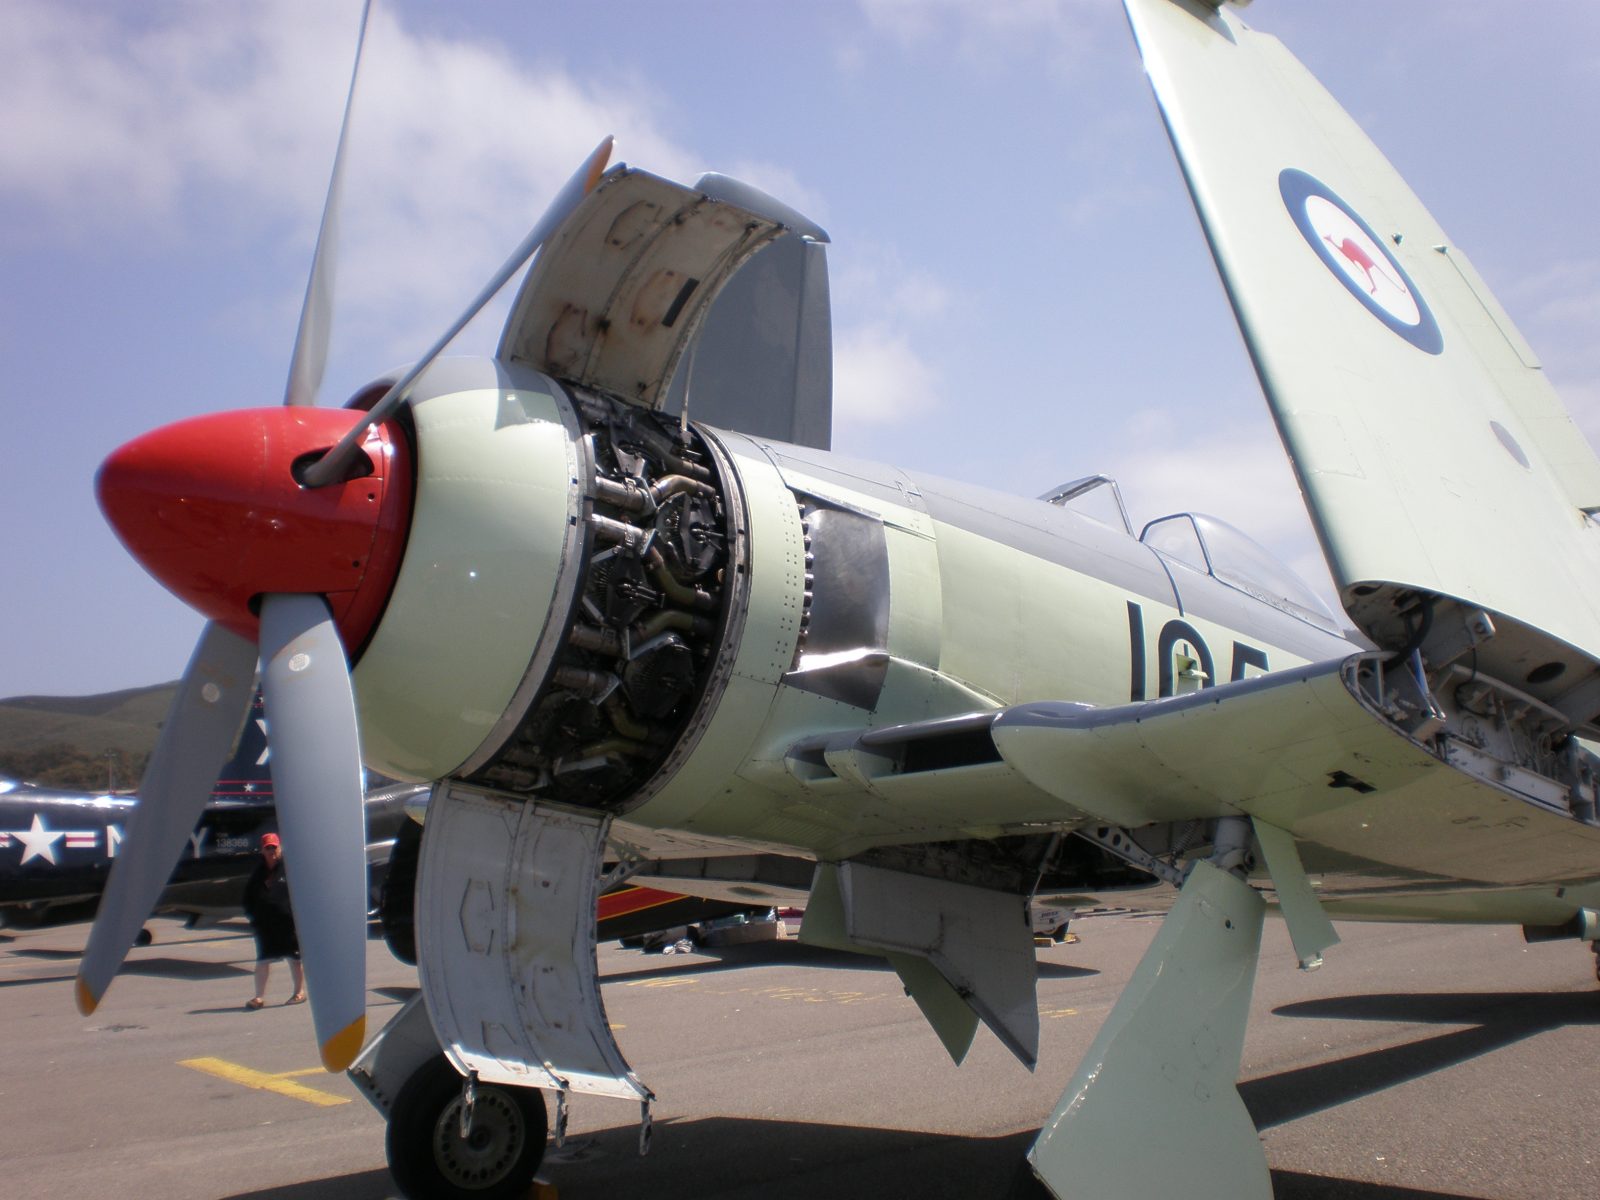 Interesting facts about the Hawker Sea Fury; British Royal navy's last Propeller Driven Aircraft